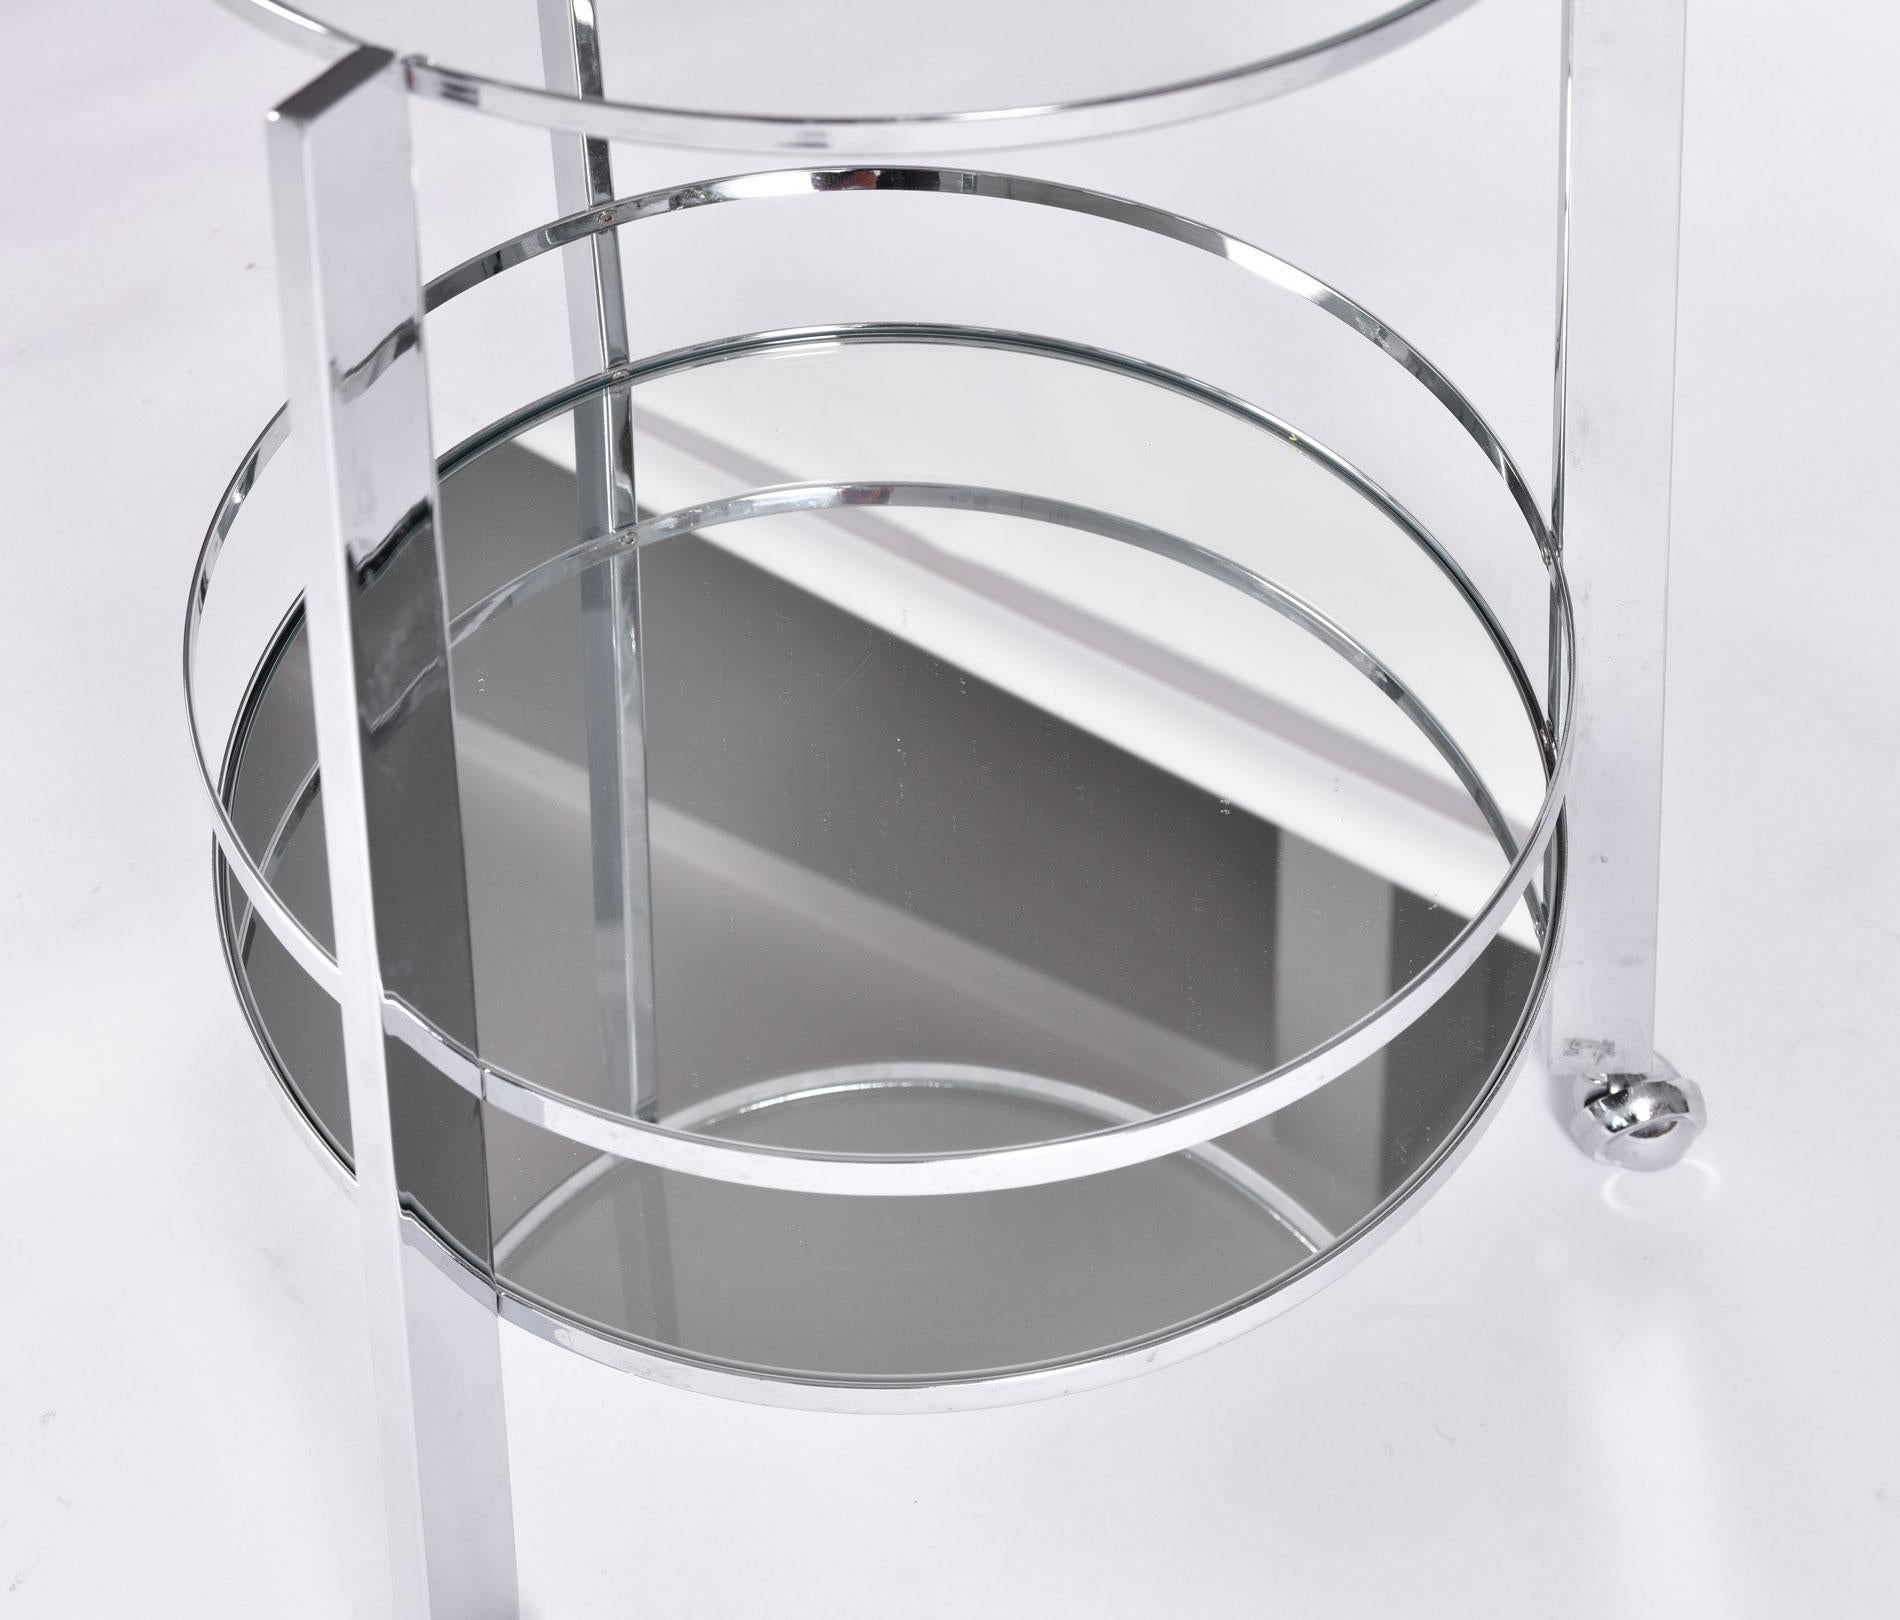 North American American 1970s Chrome Circular Drinks/ Serving Trolley For Sale